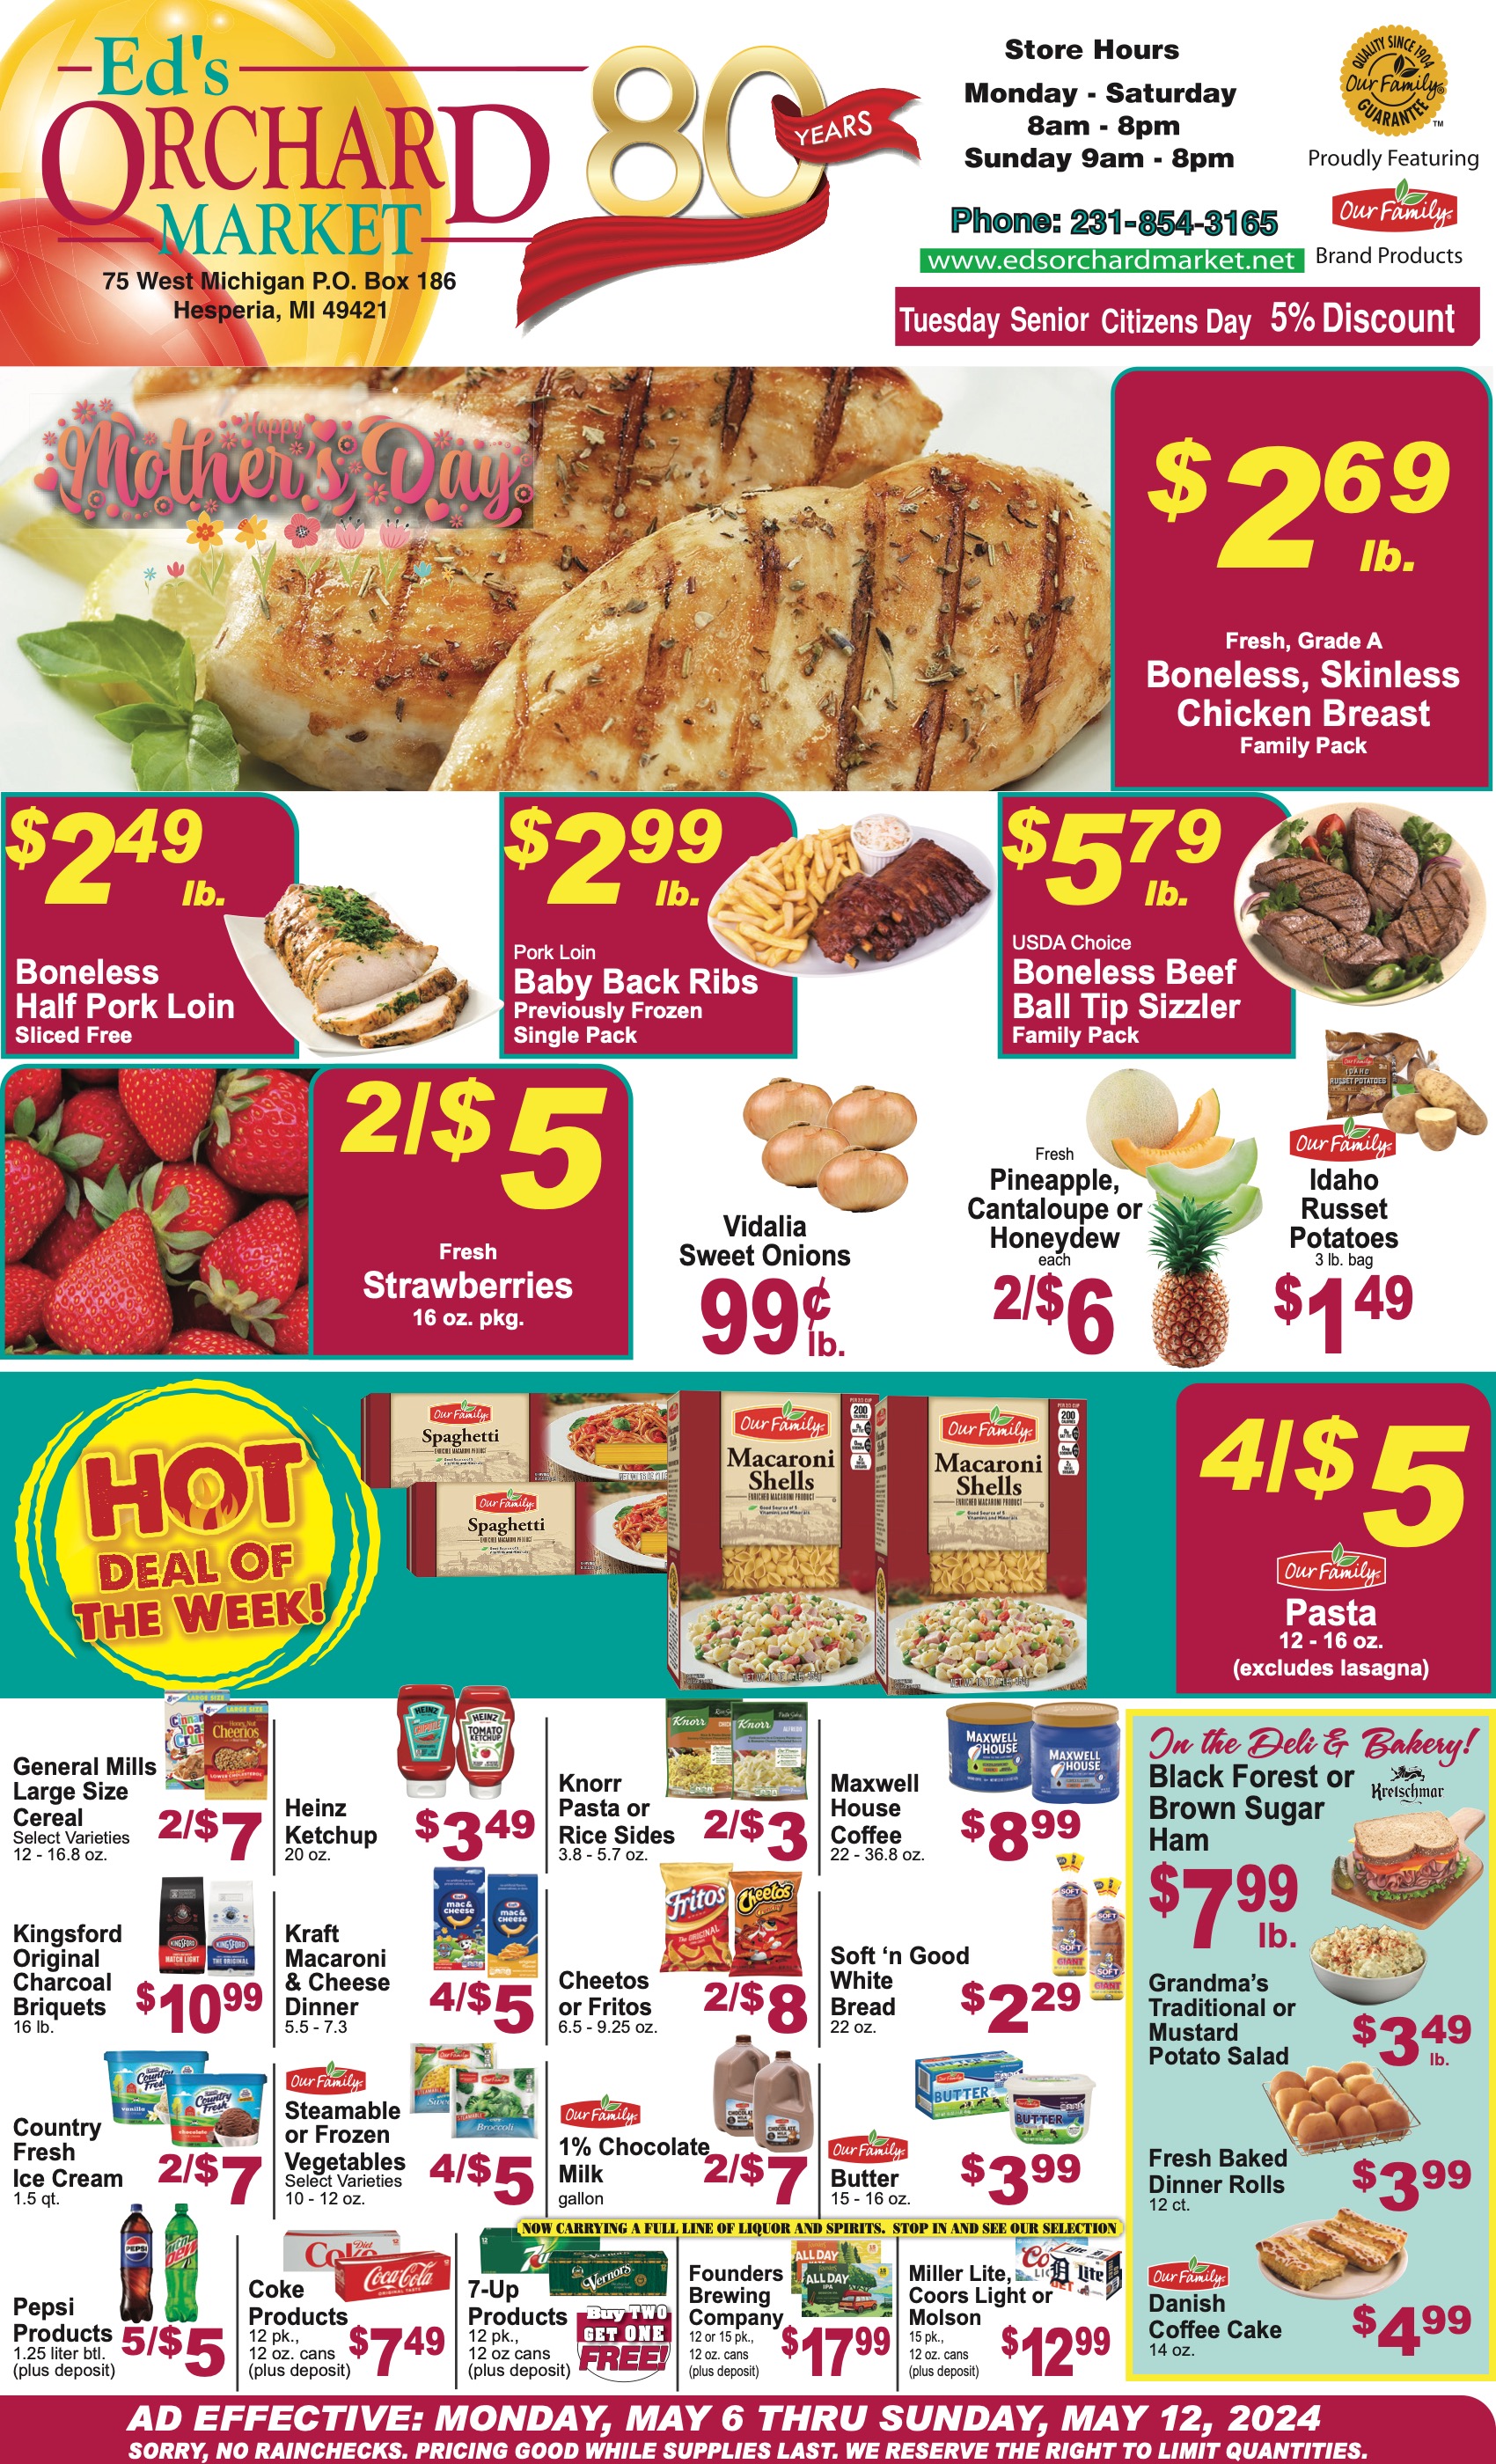 Weekly ad circular for Ed's Orchard Market